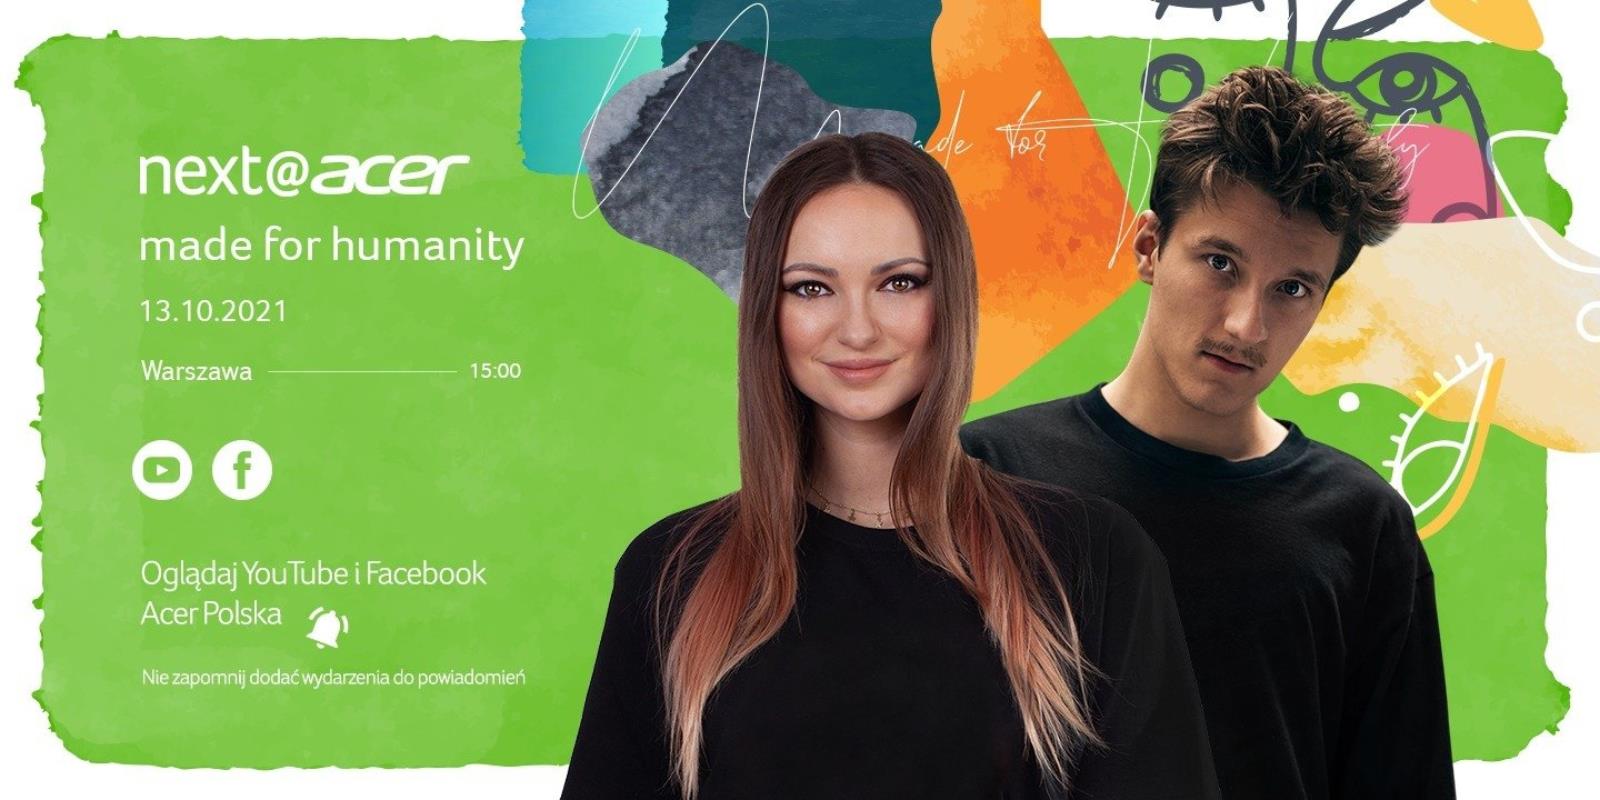 Next @ Acer, a lot of new products on the horizon.  There will also be a contest!